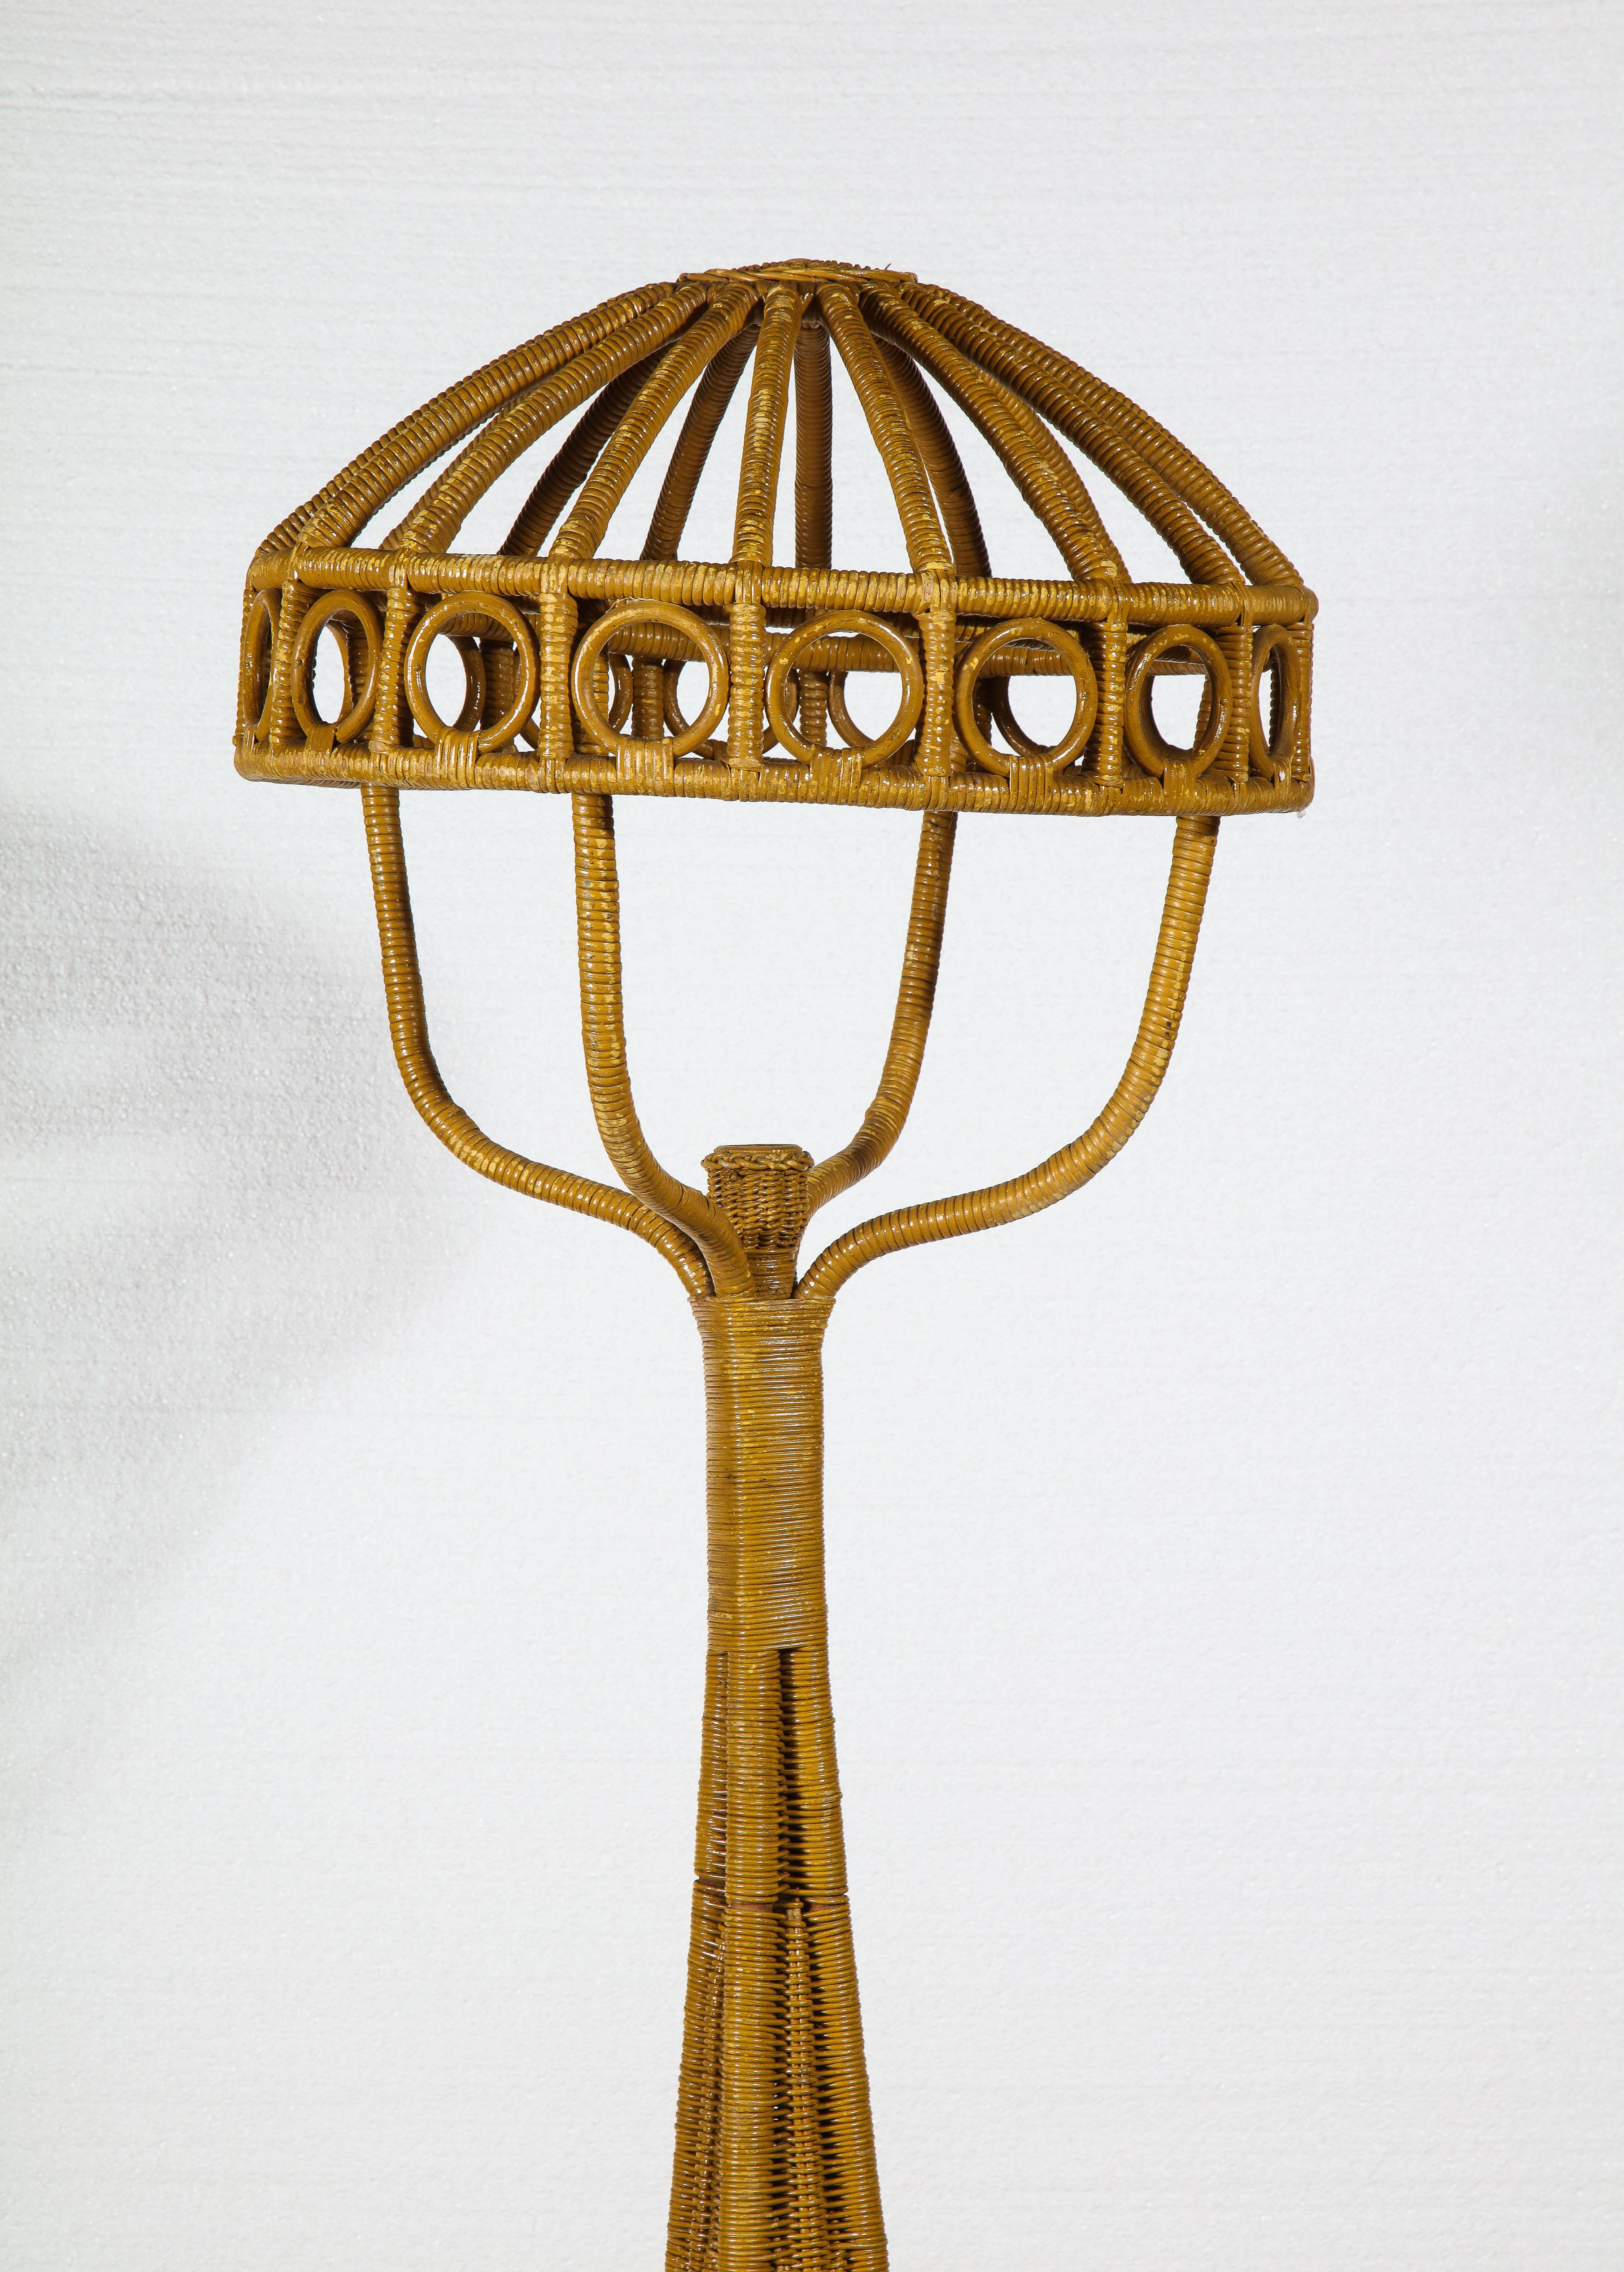 Vintage midcentury tall wicker rattan floor deco lamp, France

More photos upon request.